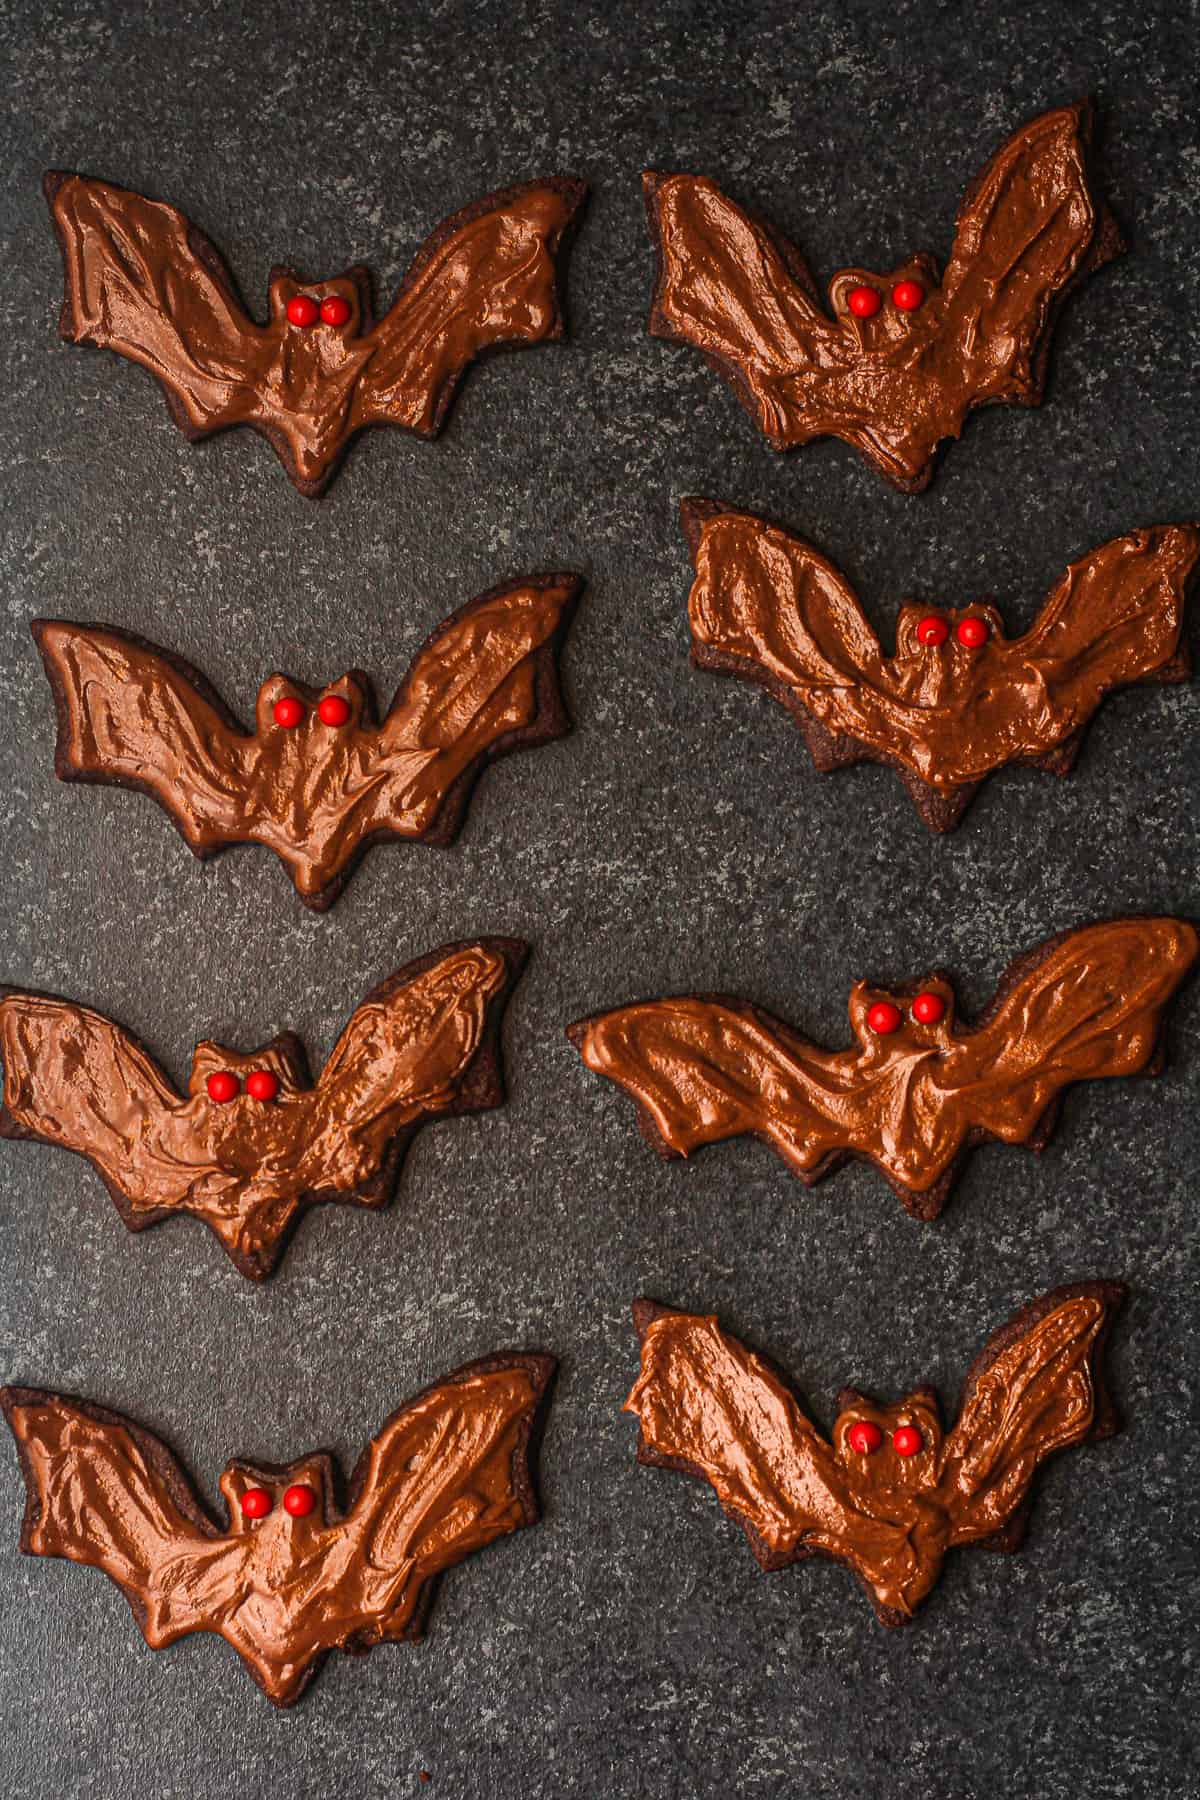 Overhead view of several decorated bat cut-out cookies with red eyes.